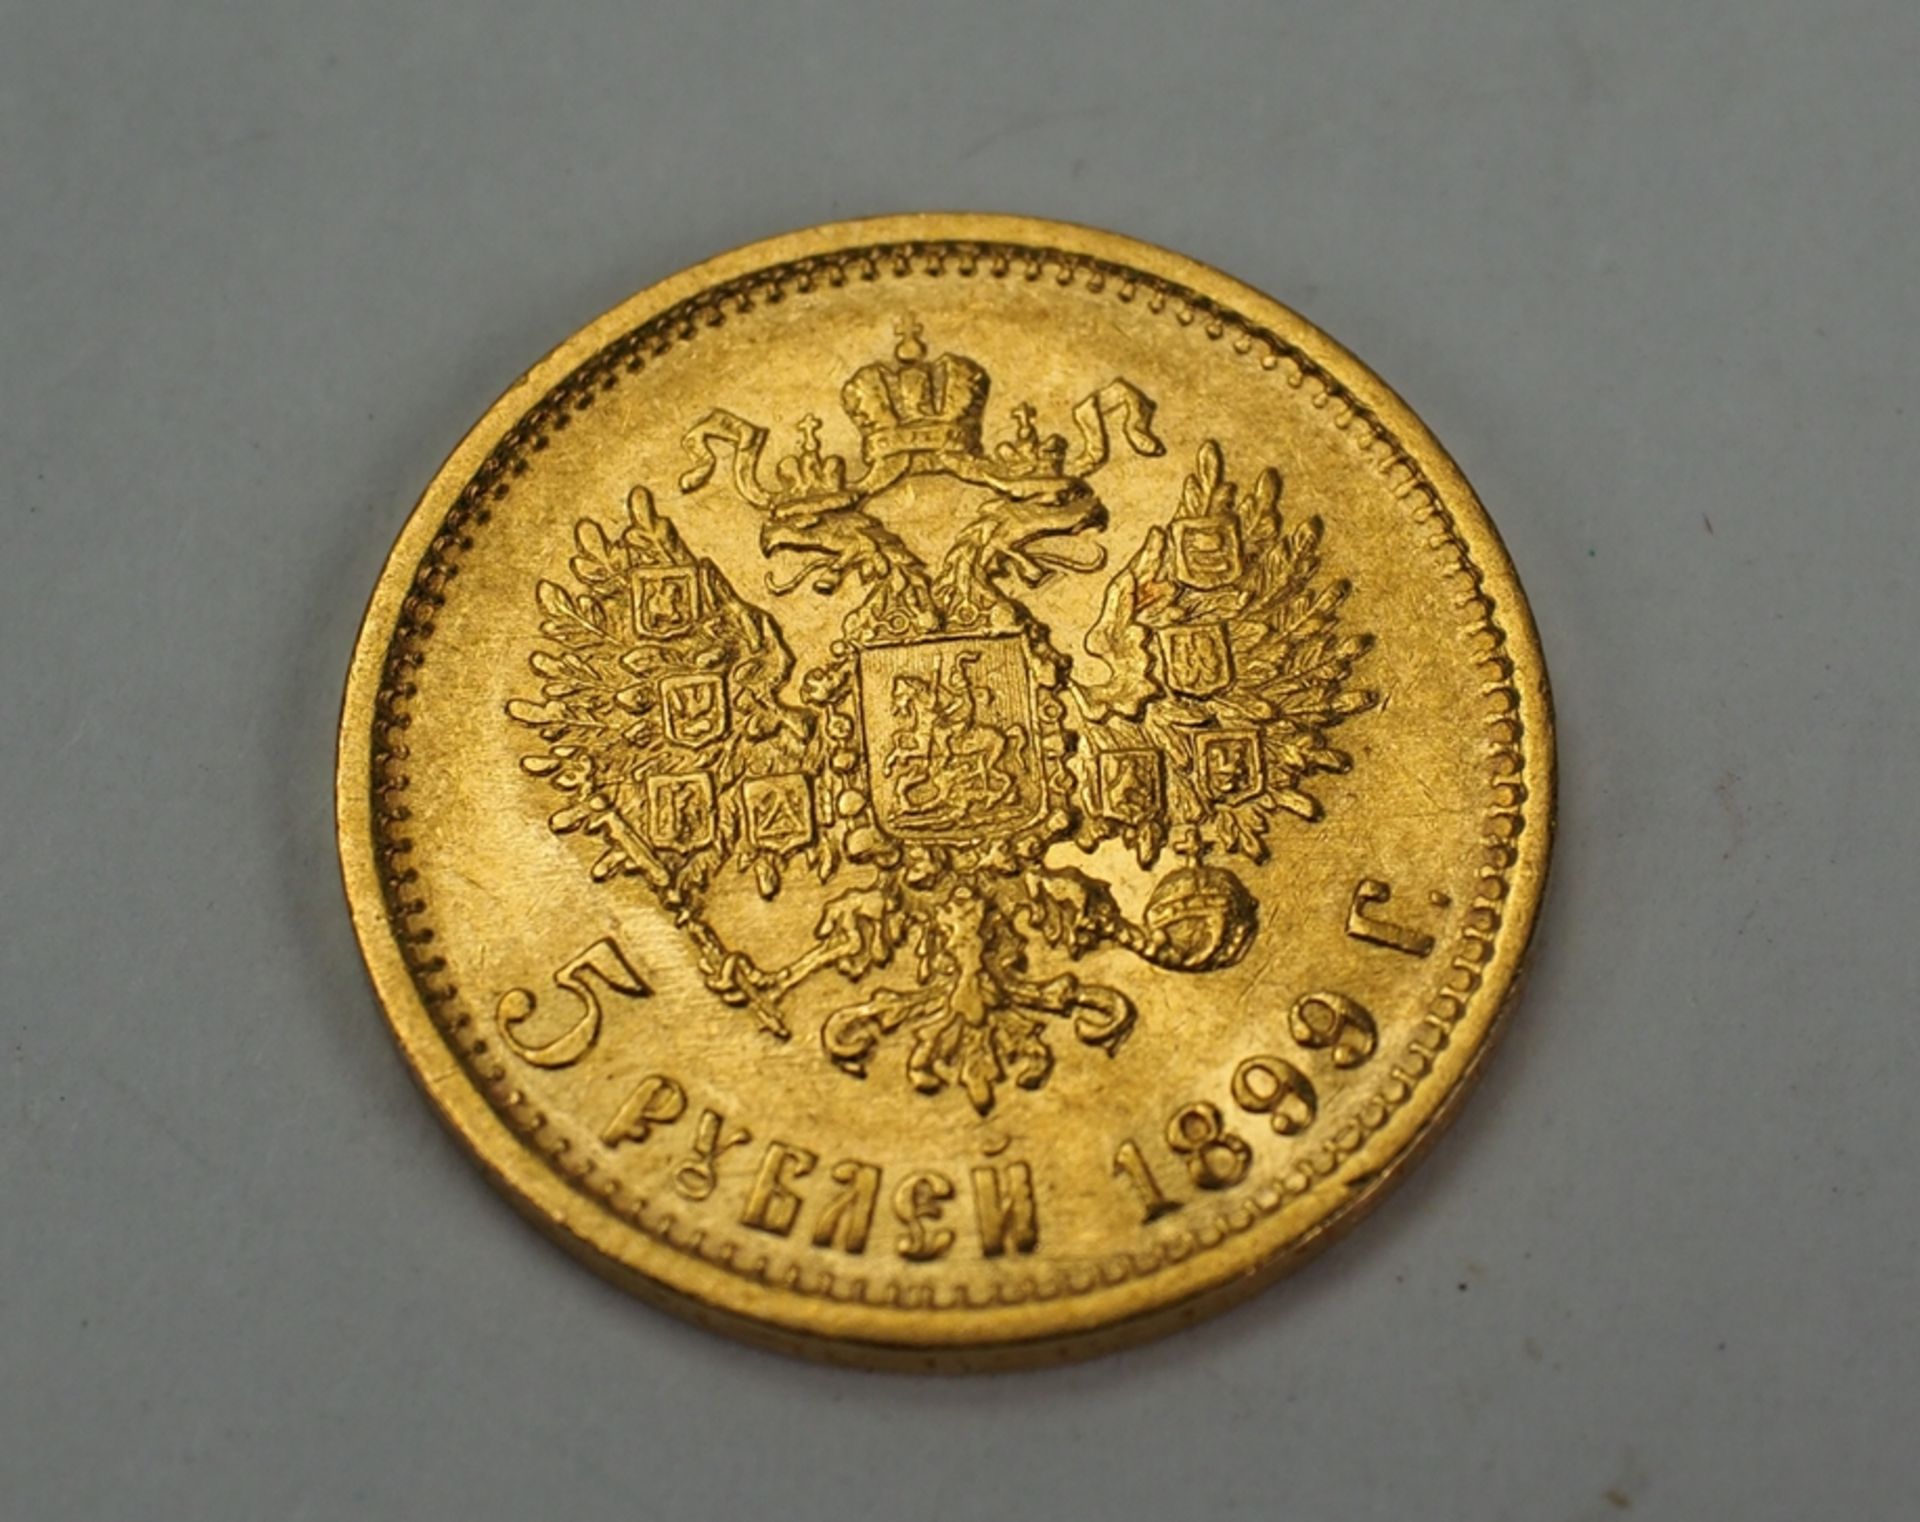 Russland: 5 Rubel 1899 - GOLD. - Image 2 of 2